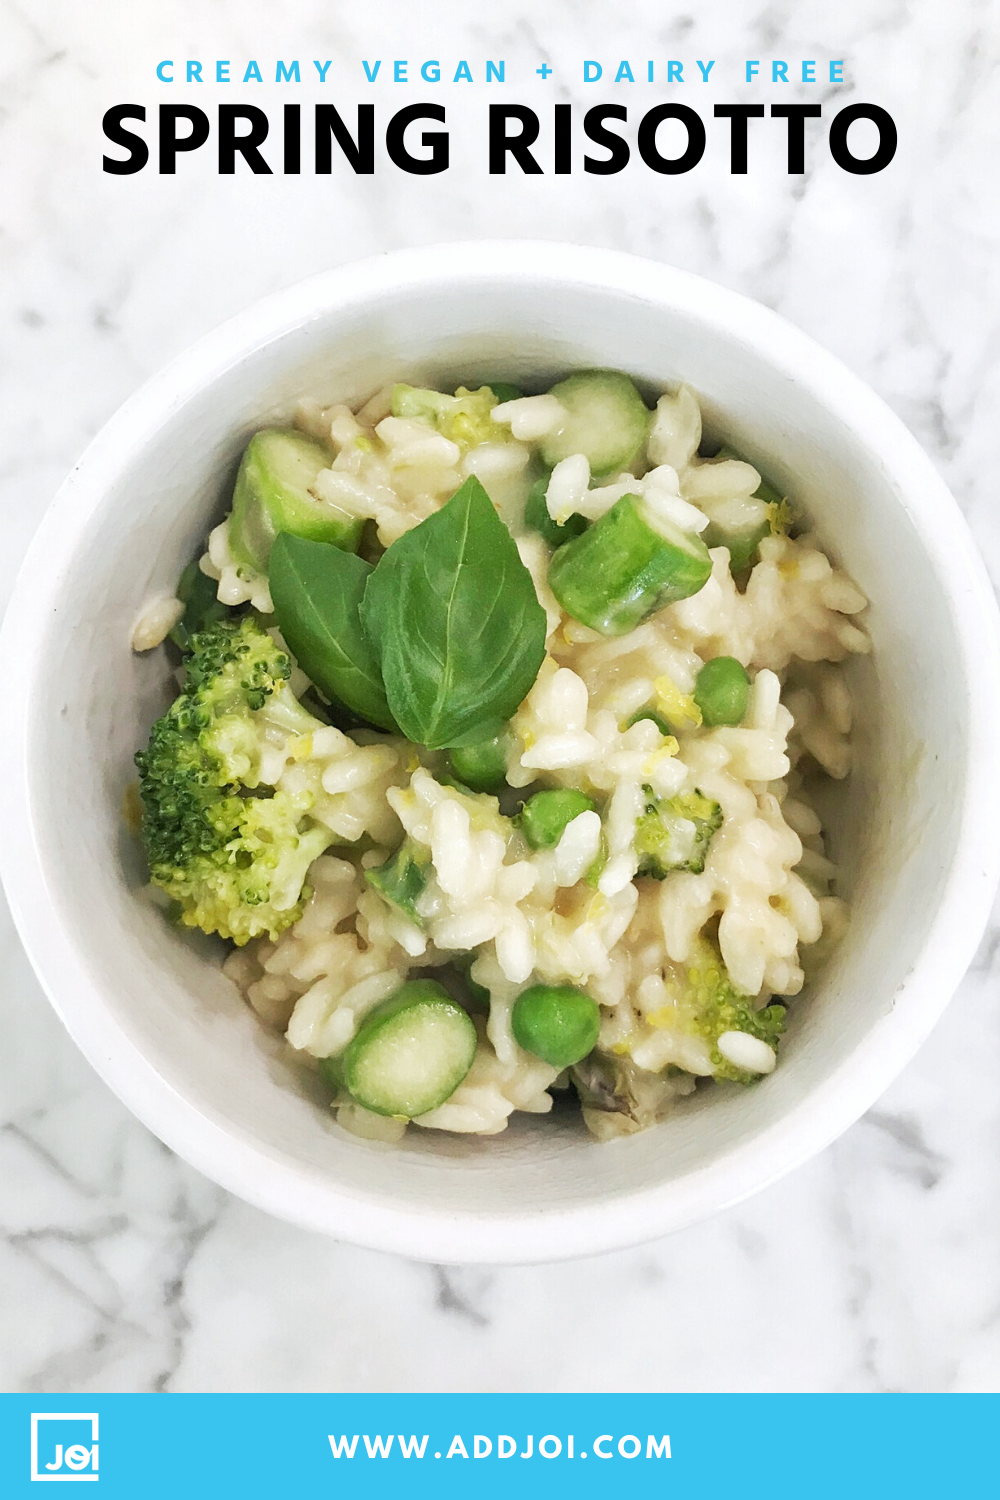 Vegan-Friendly Springtime Risotto Made with JOI is the Simple Way to Make Dinner Gourmet